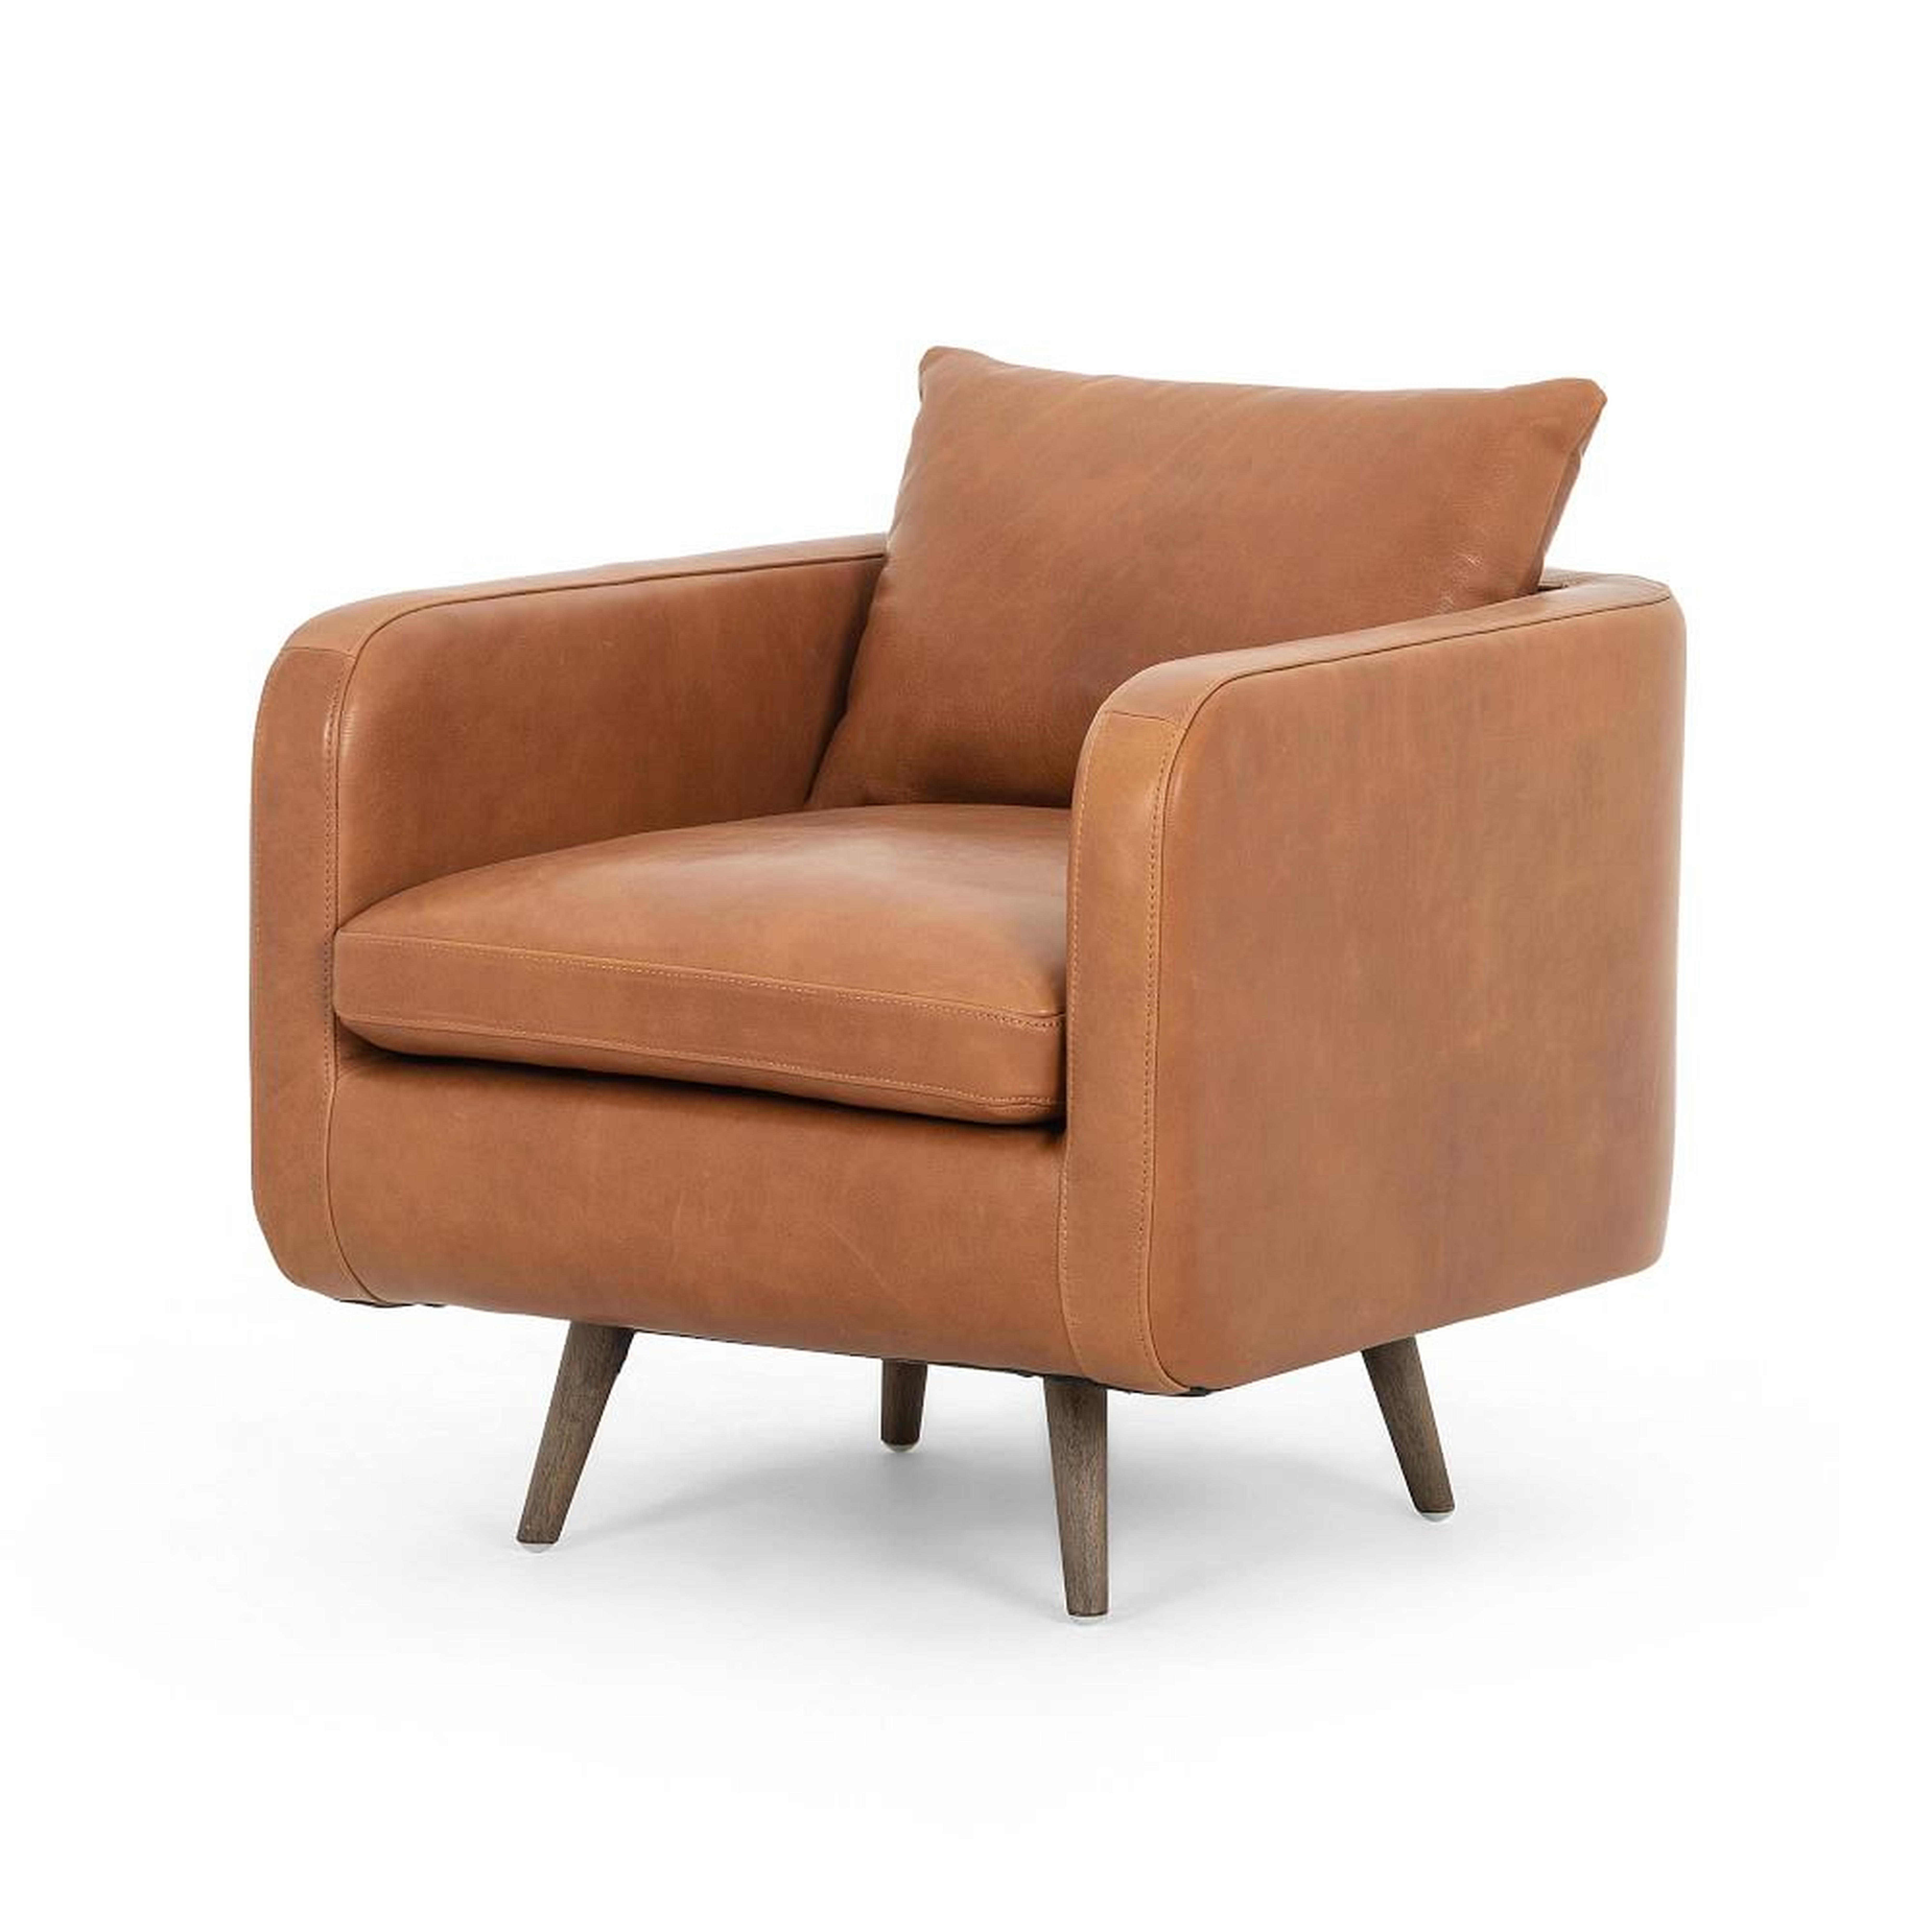 Round Back Leather Swivel Chair, Haven Tobacco - West Elm